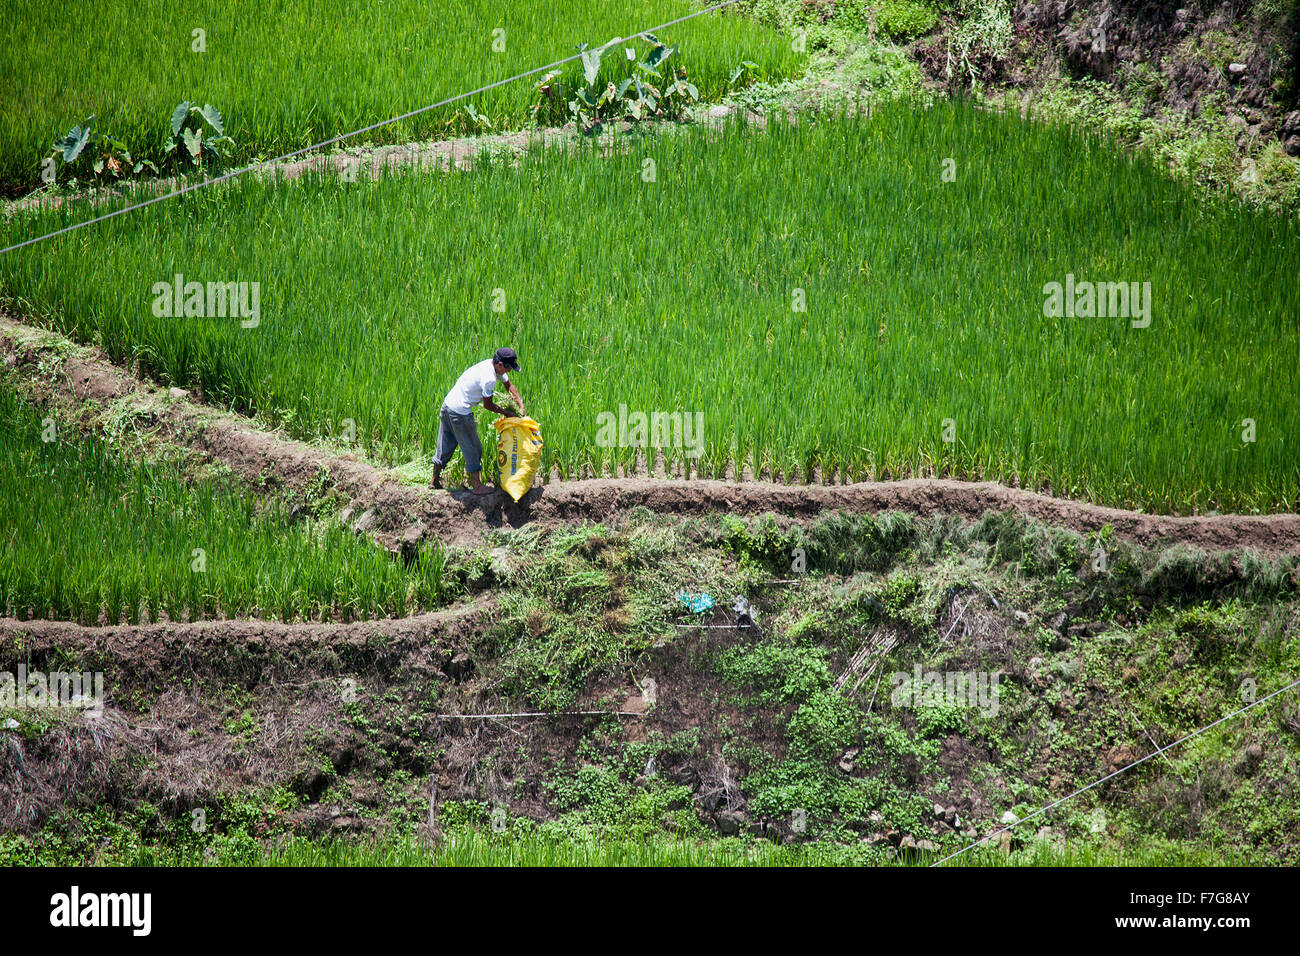 A Filipino farmer working in his rice paddy packs freshly harvested rice shoots into a sack in Sagada, Luzon, Philippines. Stock Photo